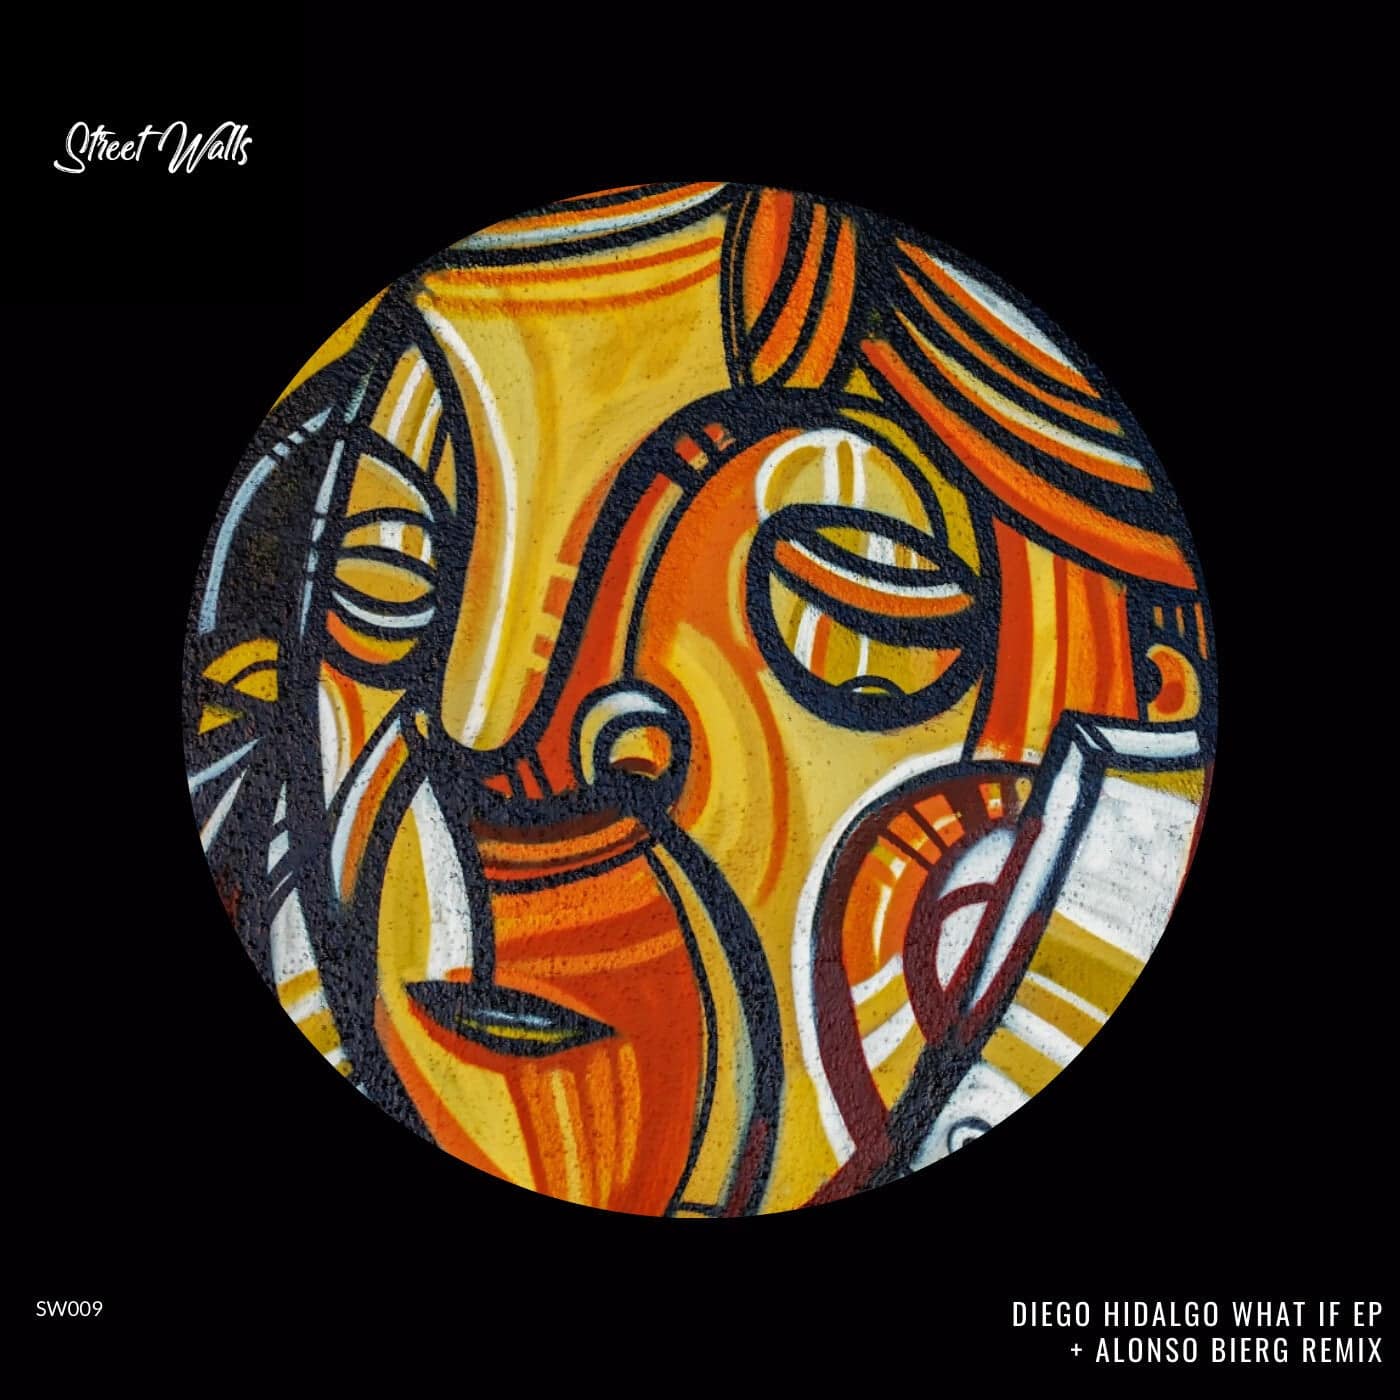 image cover: Diego Hidalgo - What If EP + Alonso Bierg Remix / SW009